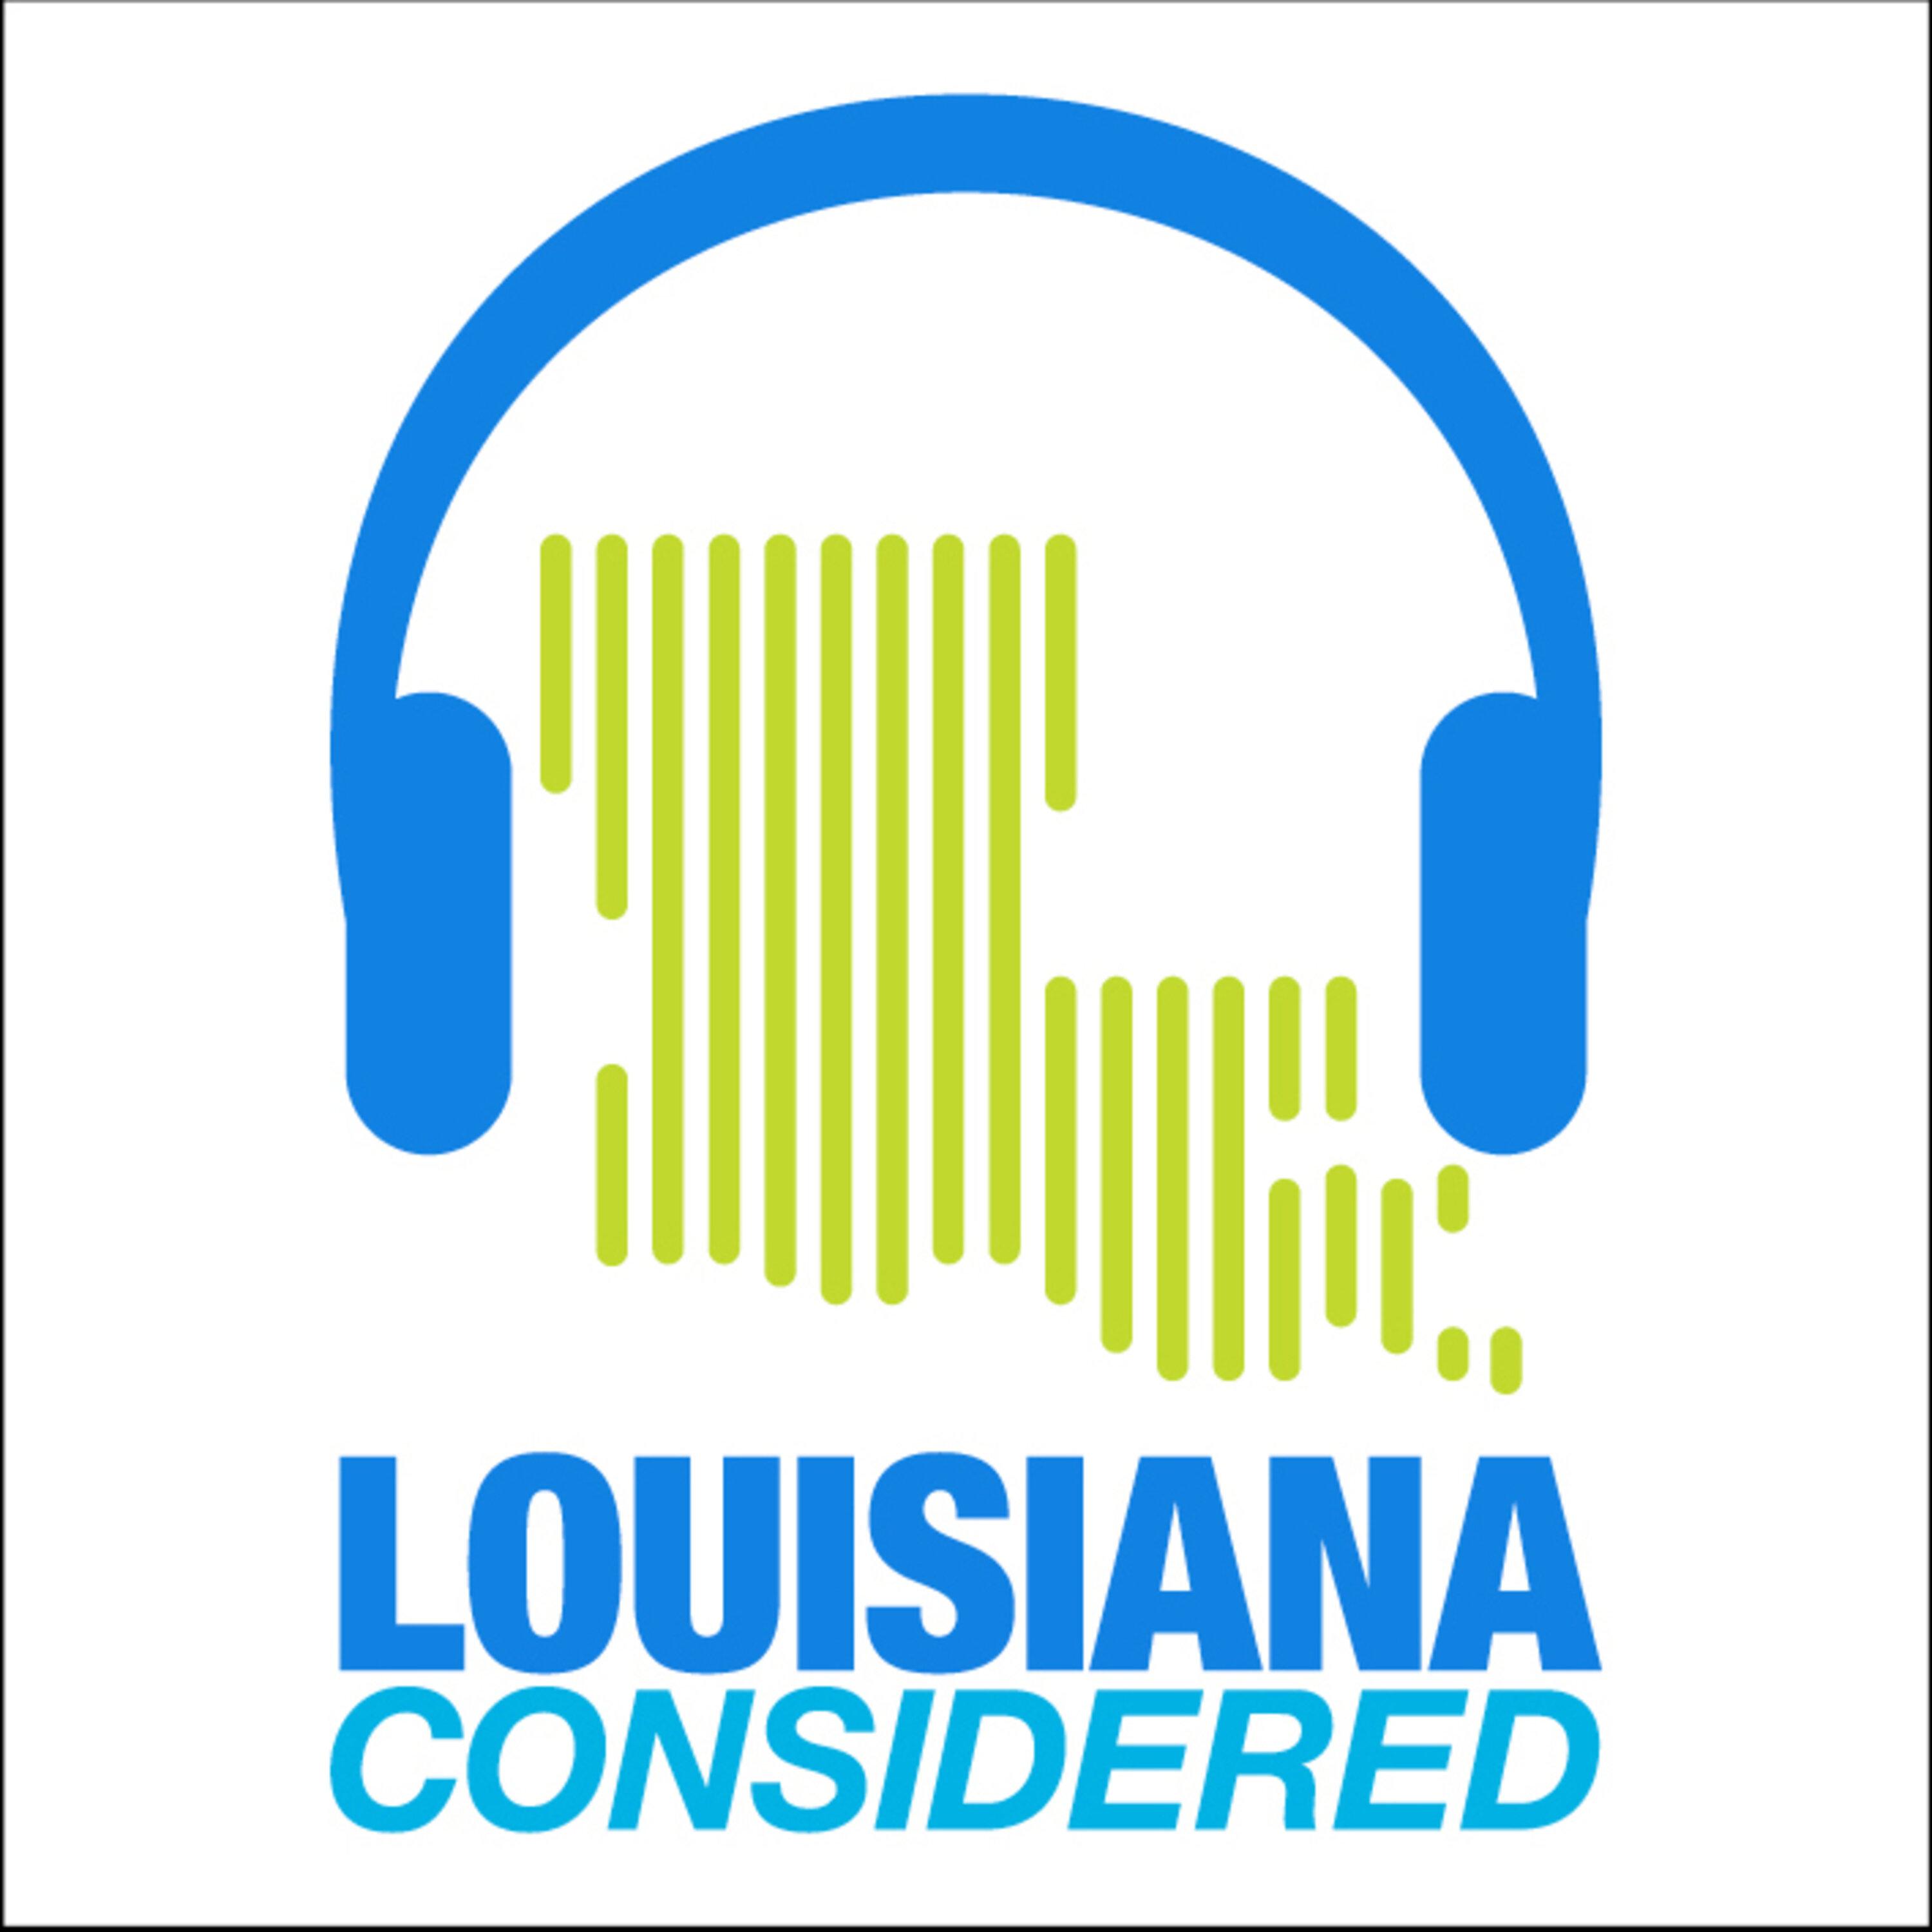 Thumbnail for "Louisiana Considered: Baton Rouge region is expected to see economic growth in 2022".